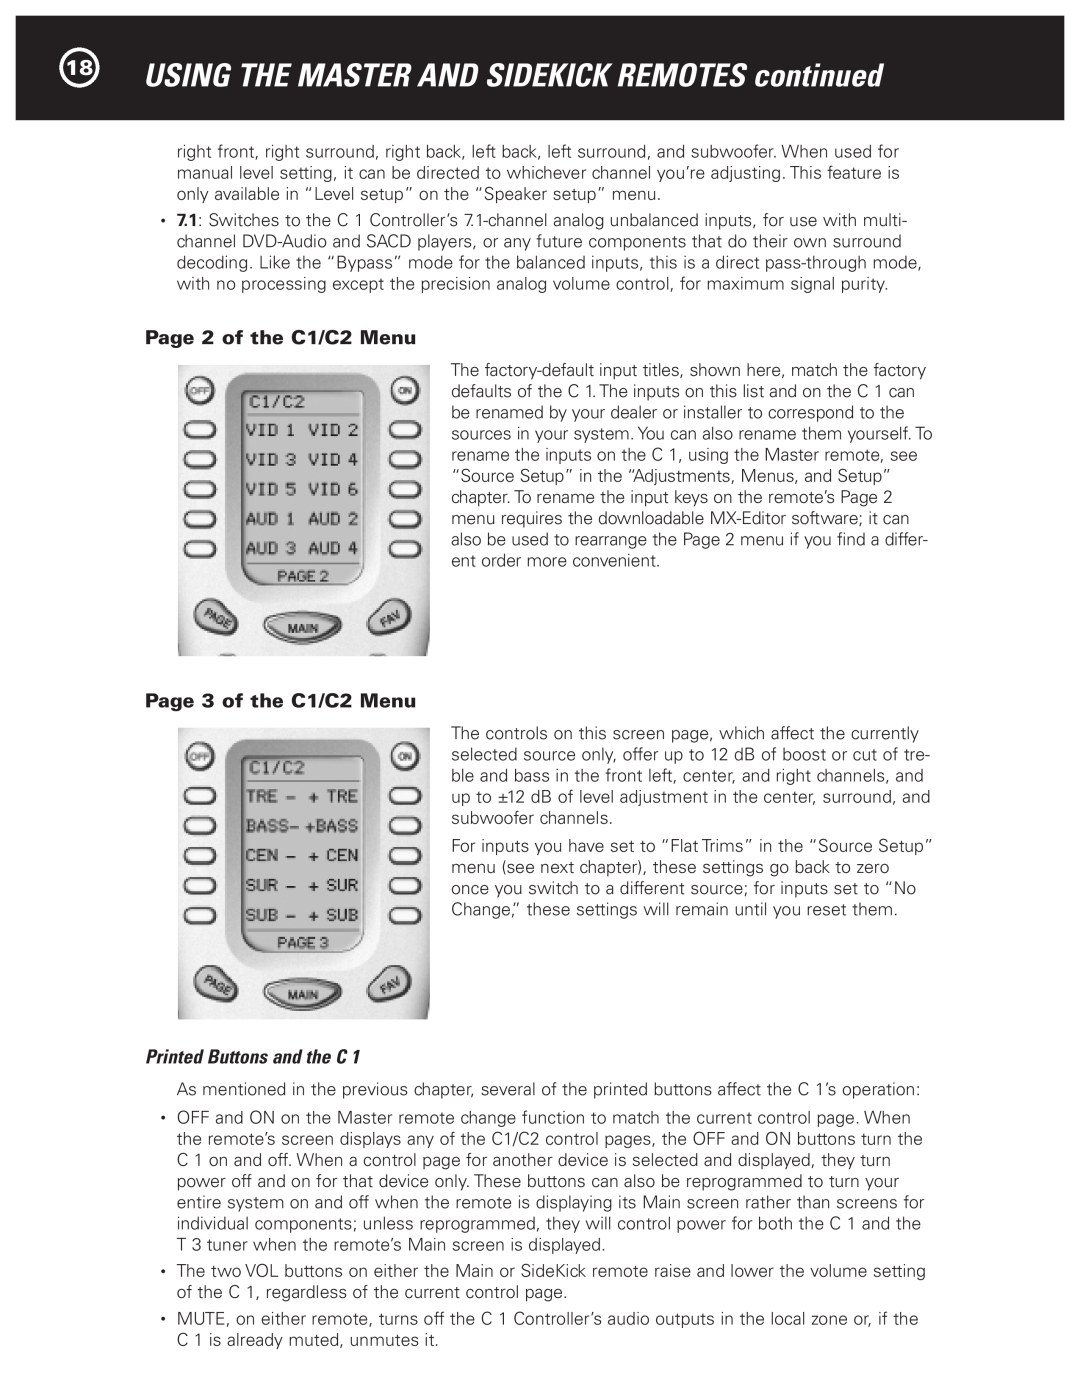 Parasound Halo C1 Controller manual 18USING THE MASTER AND SIDEKICK REMOTES continued, Page 2 of the C1/C2 Menu 